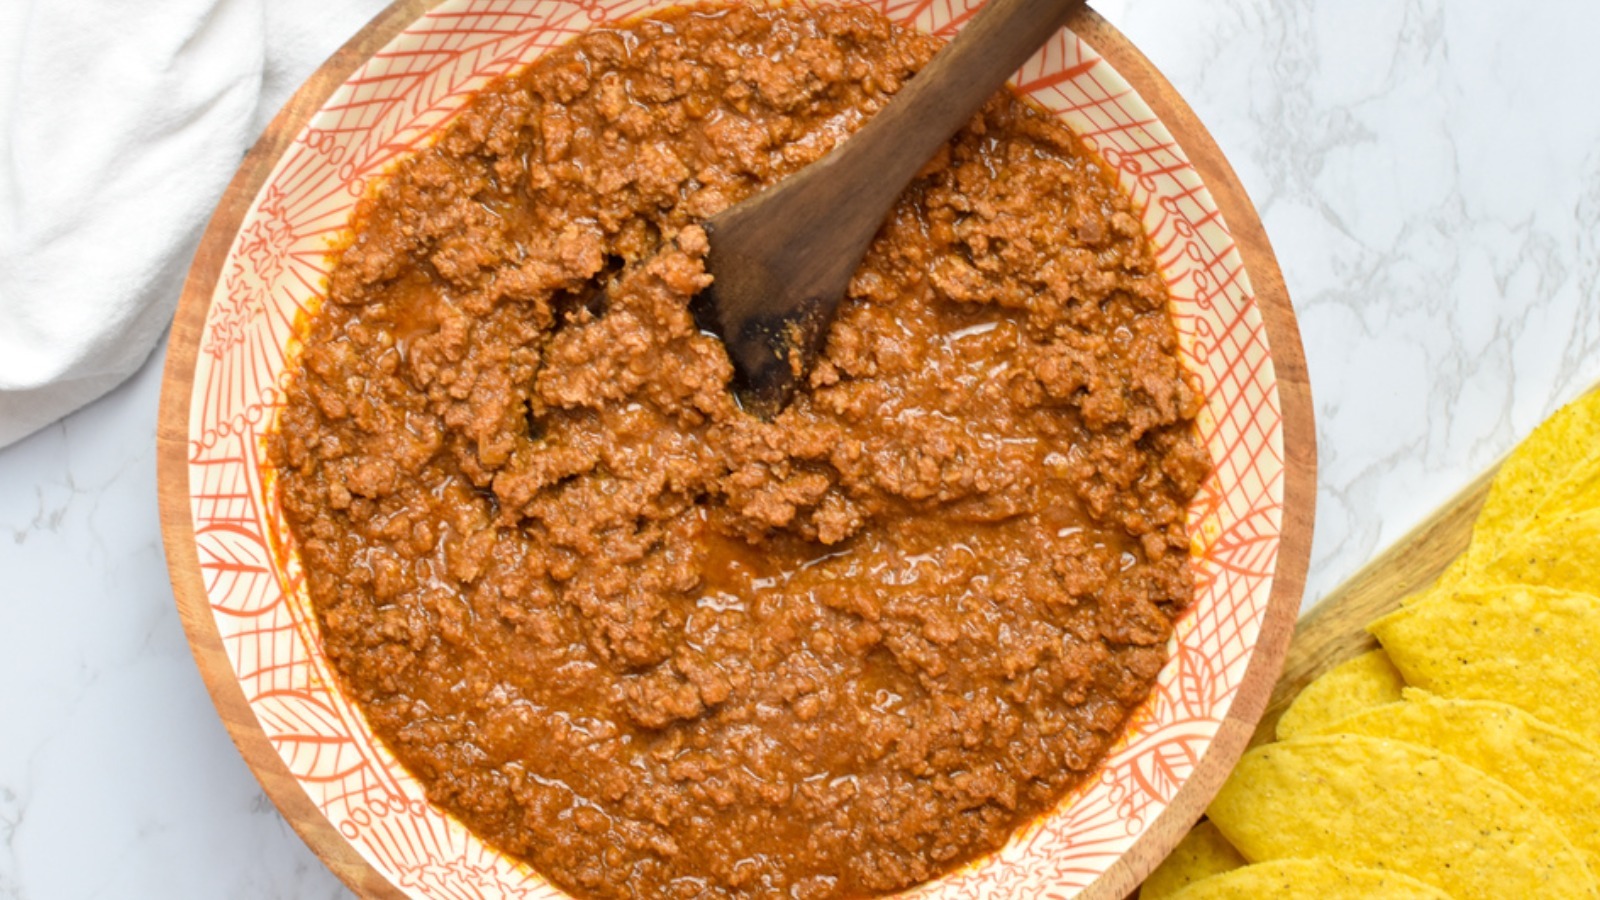 https://www.mashed.com/img/gallery/lean-yet-juicy-taco-meat-recipe/l-intro-1659827158.jpg